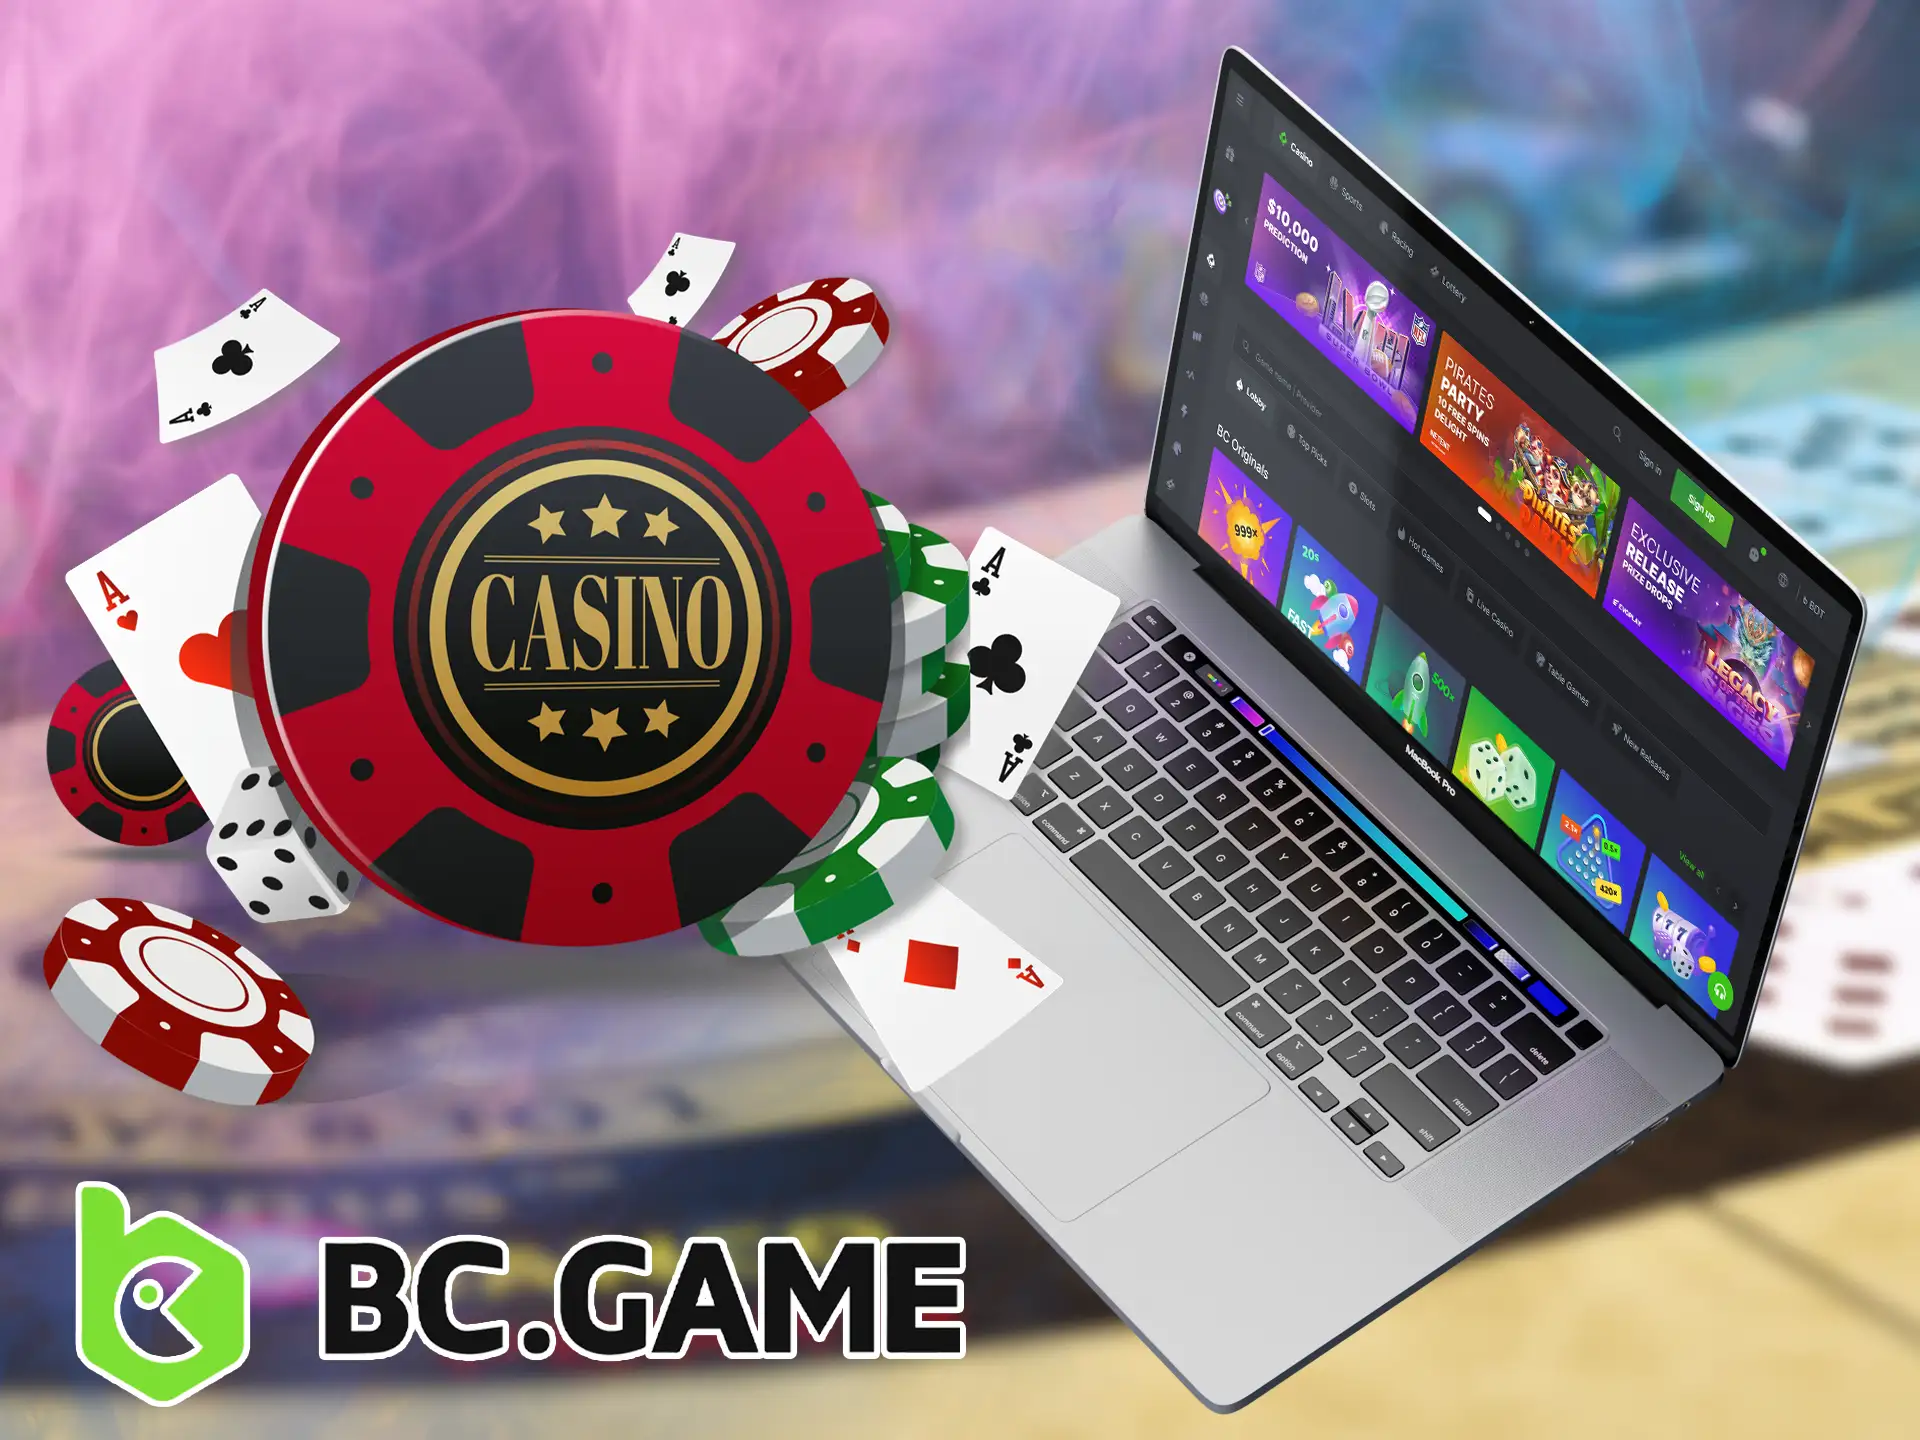 The fully licensed BC GAME platform invites players to try their luck at betting and casino.